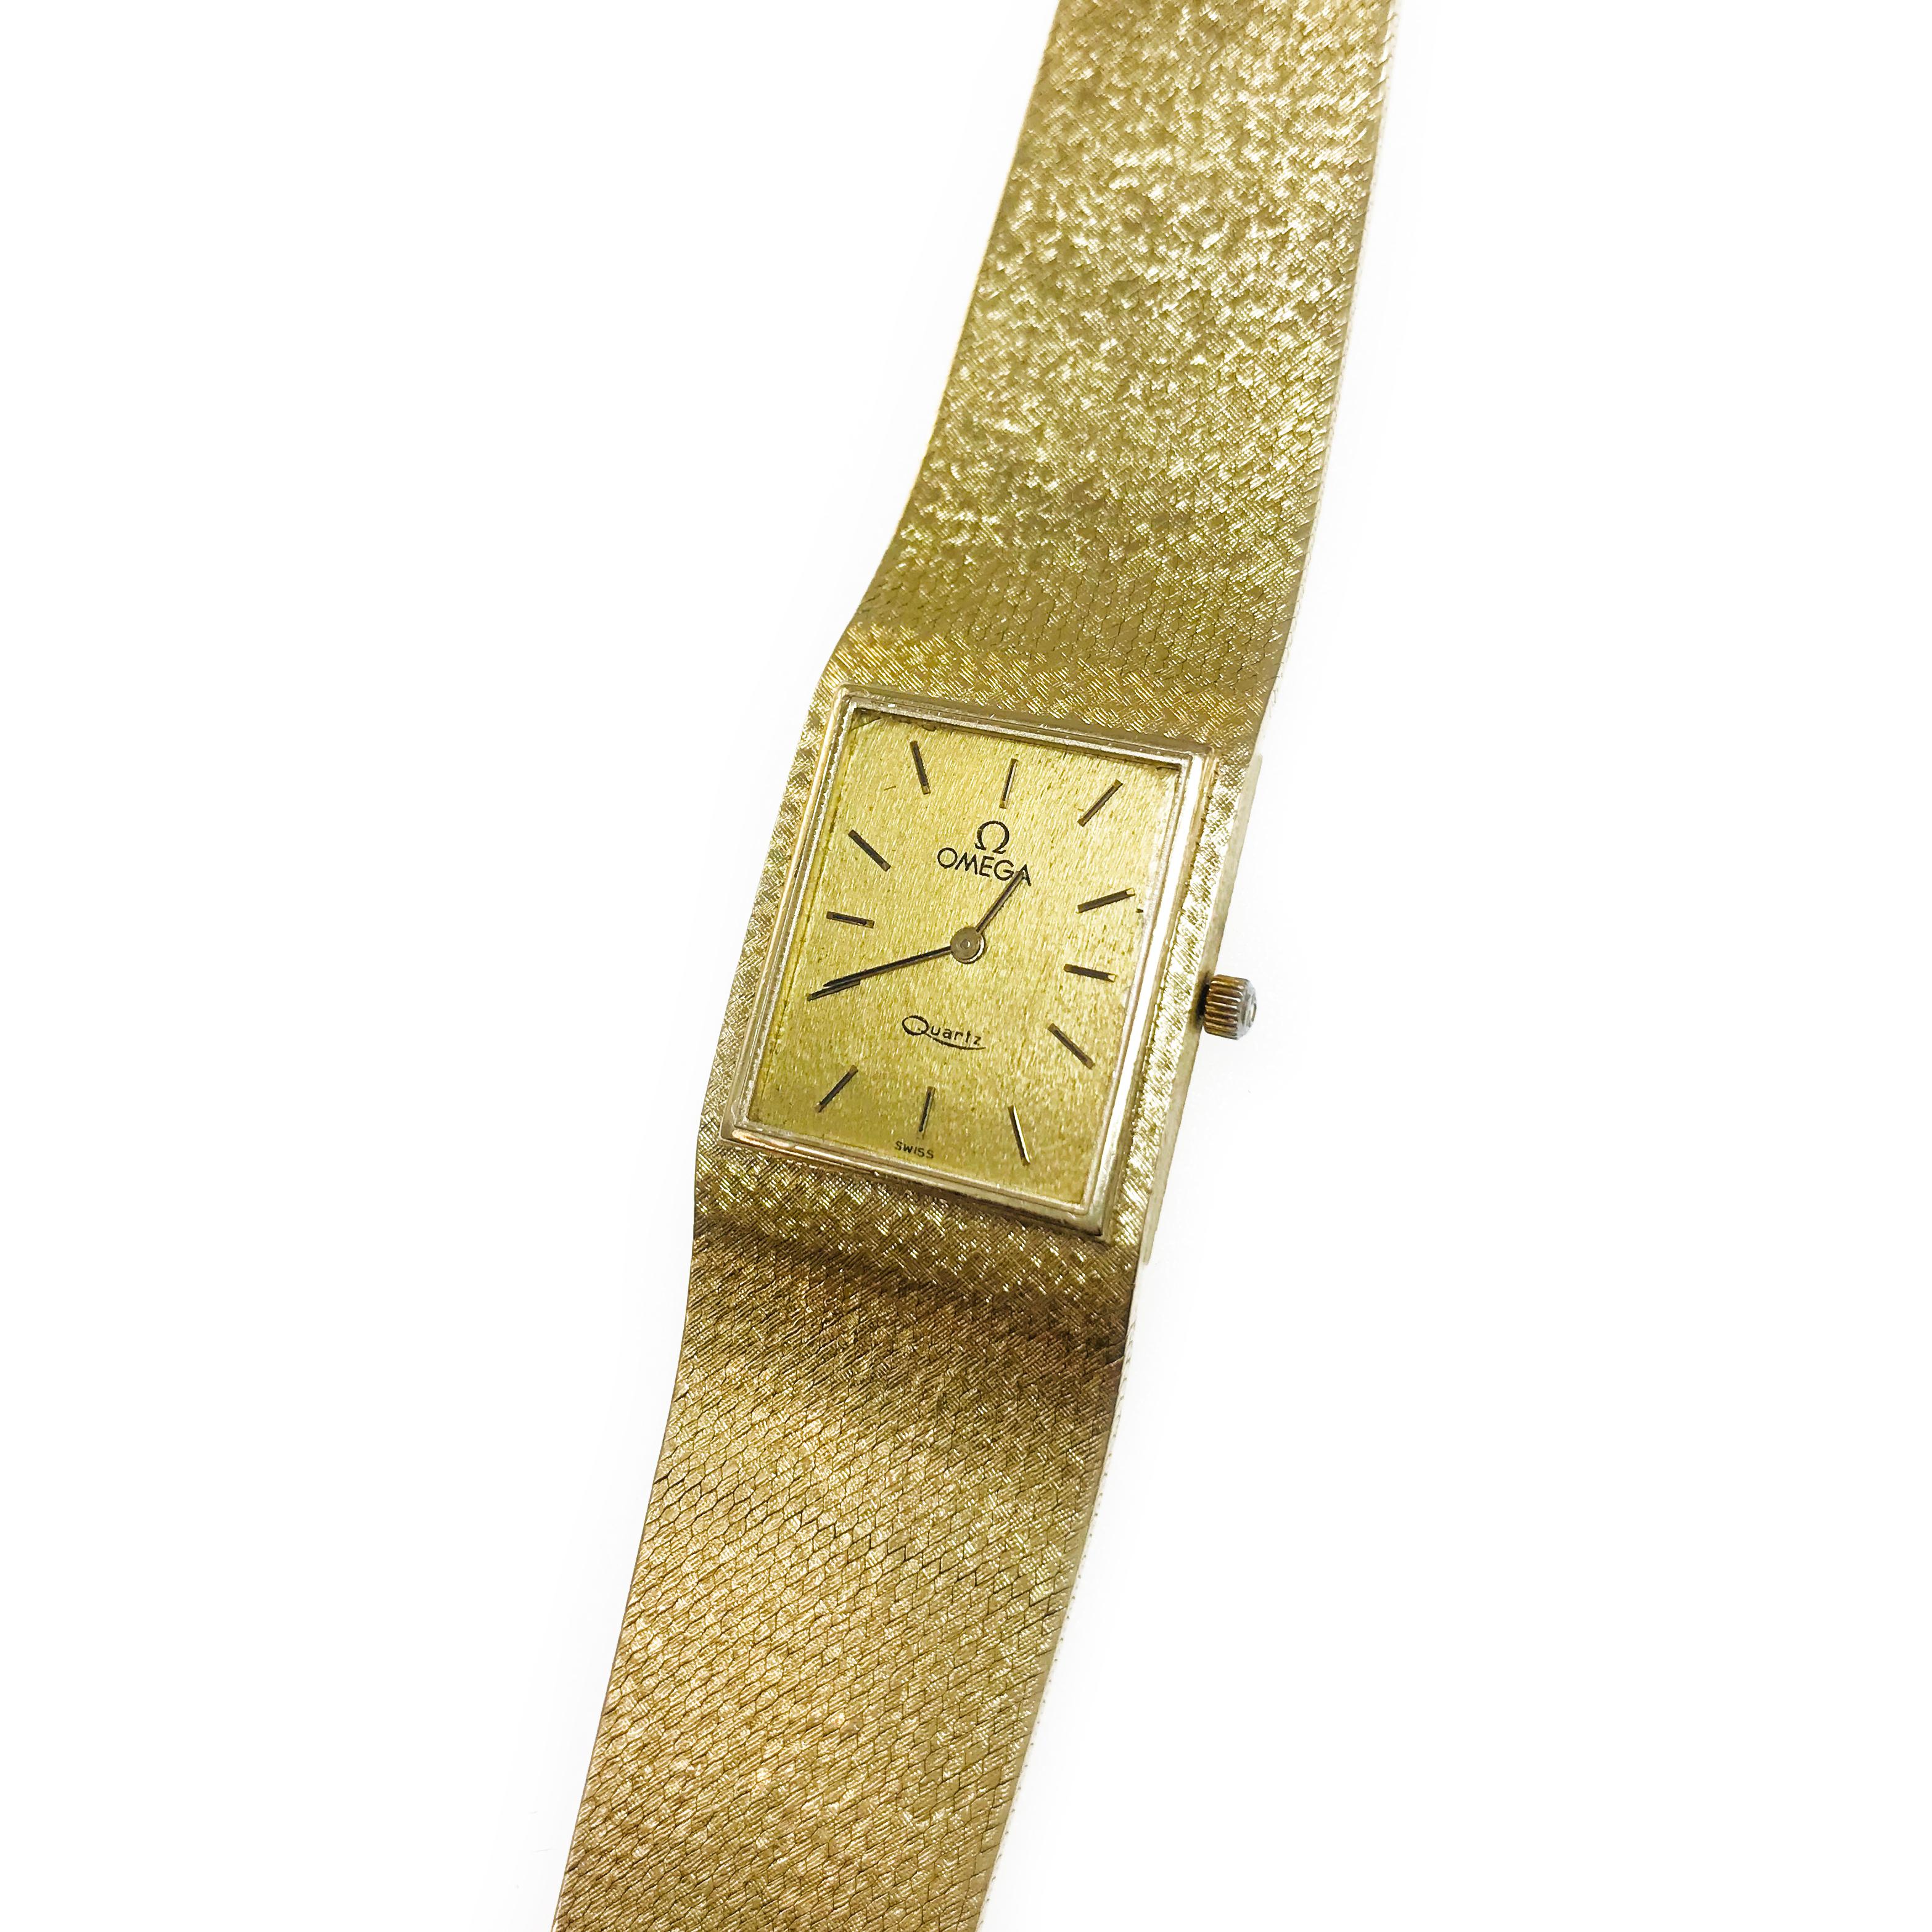 Vintage Thin 14 Karat Omega 6 Jewel Quartz Watch. The rectangular-faced dial is framed in a gold bezel and the rest of the dial and band has a weave pattern. Baton-style hour and minute hands and the Omega symbol on the crown adds an elegant detail